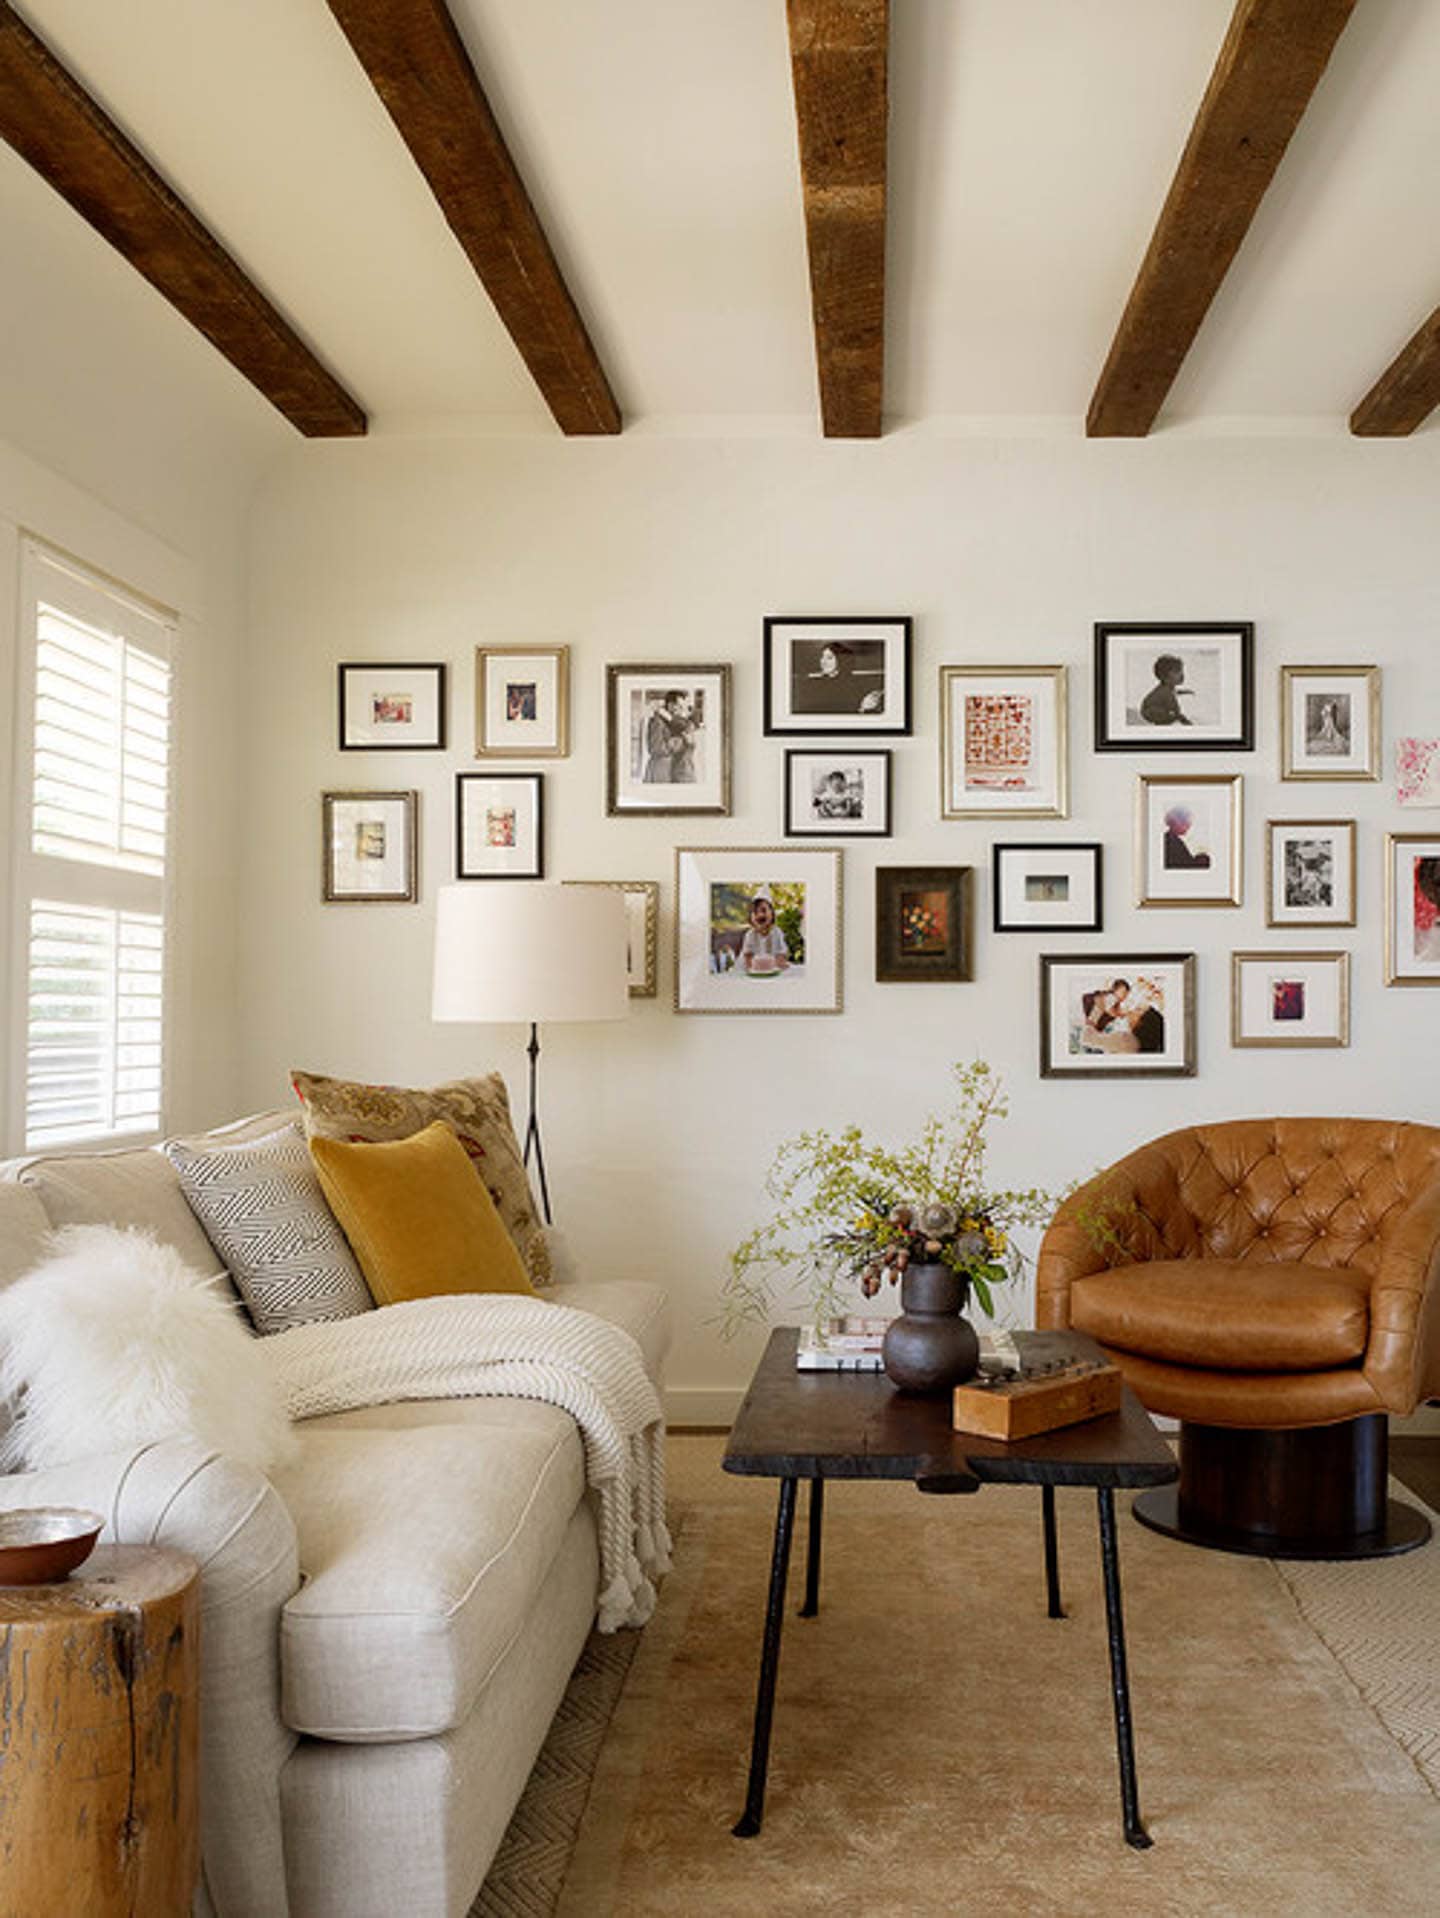 A cream living room with wood ceiling beams